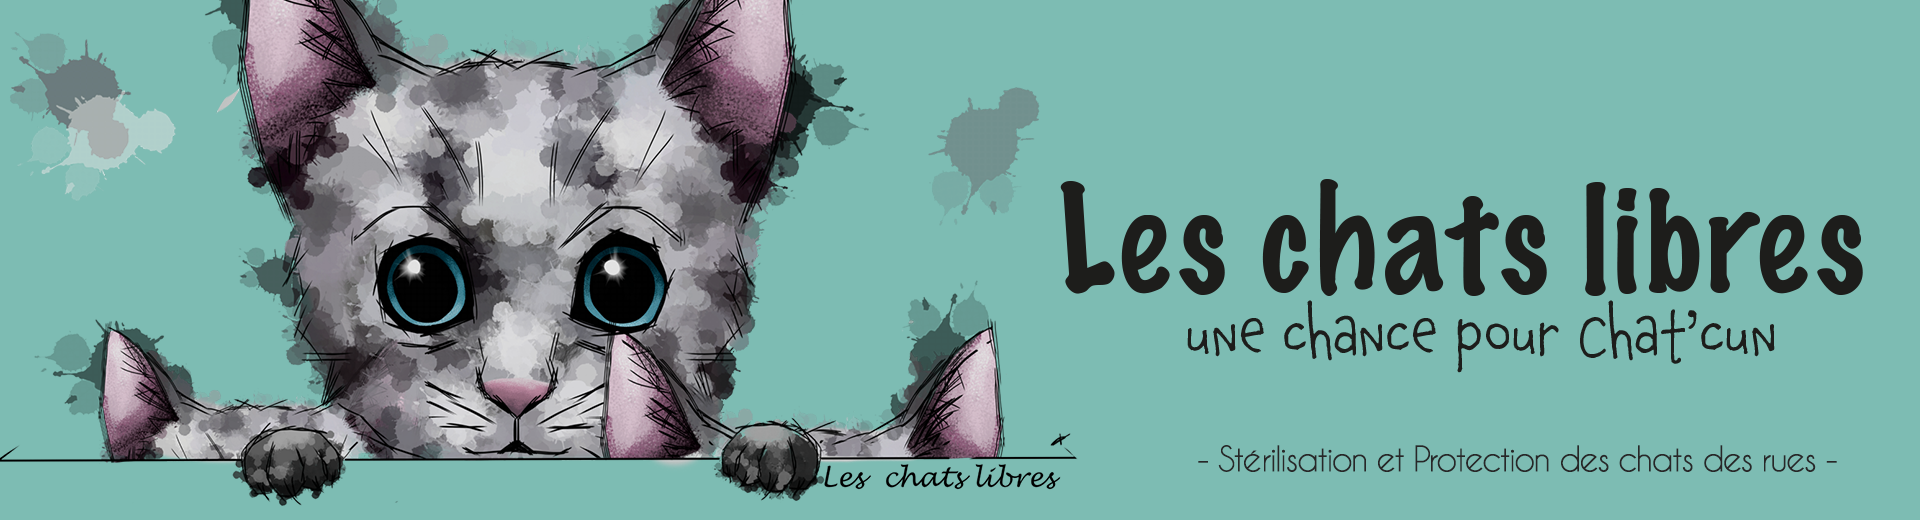 Voyager avec son chat - Absolument Chats Comportement & Conseils